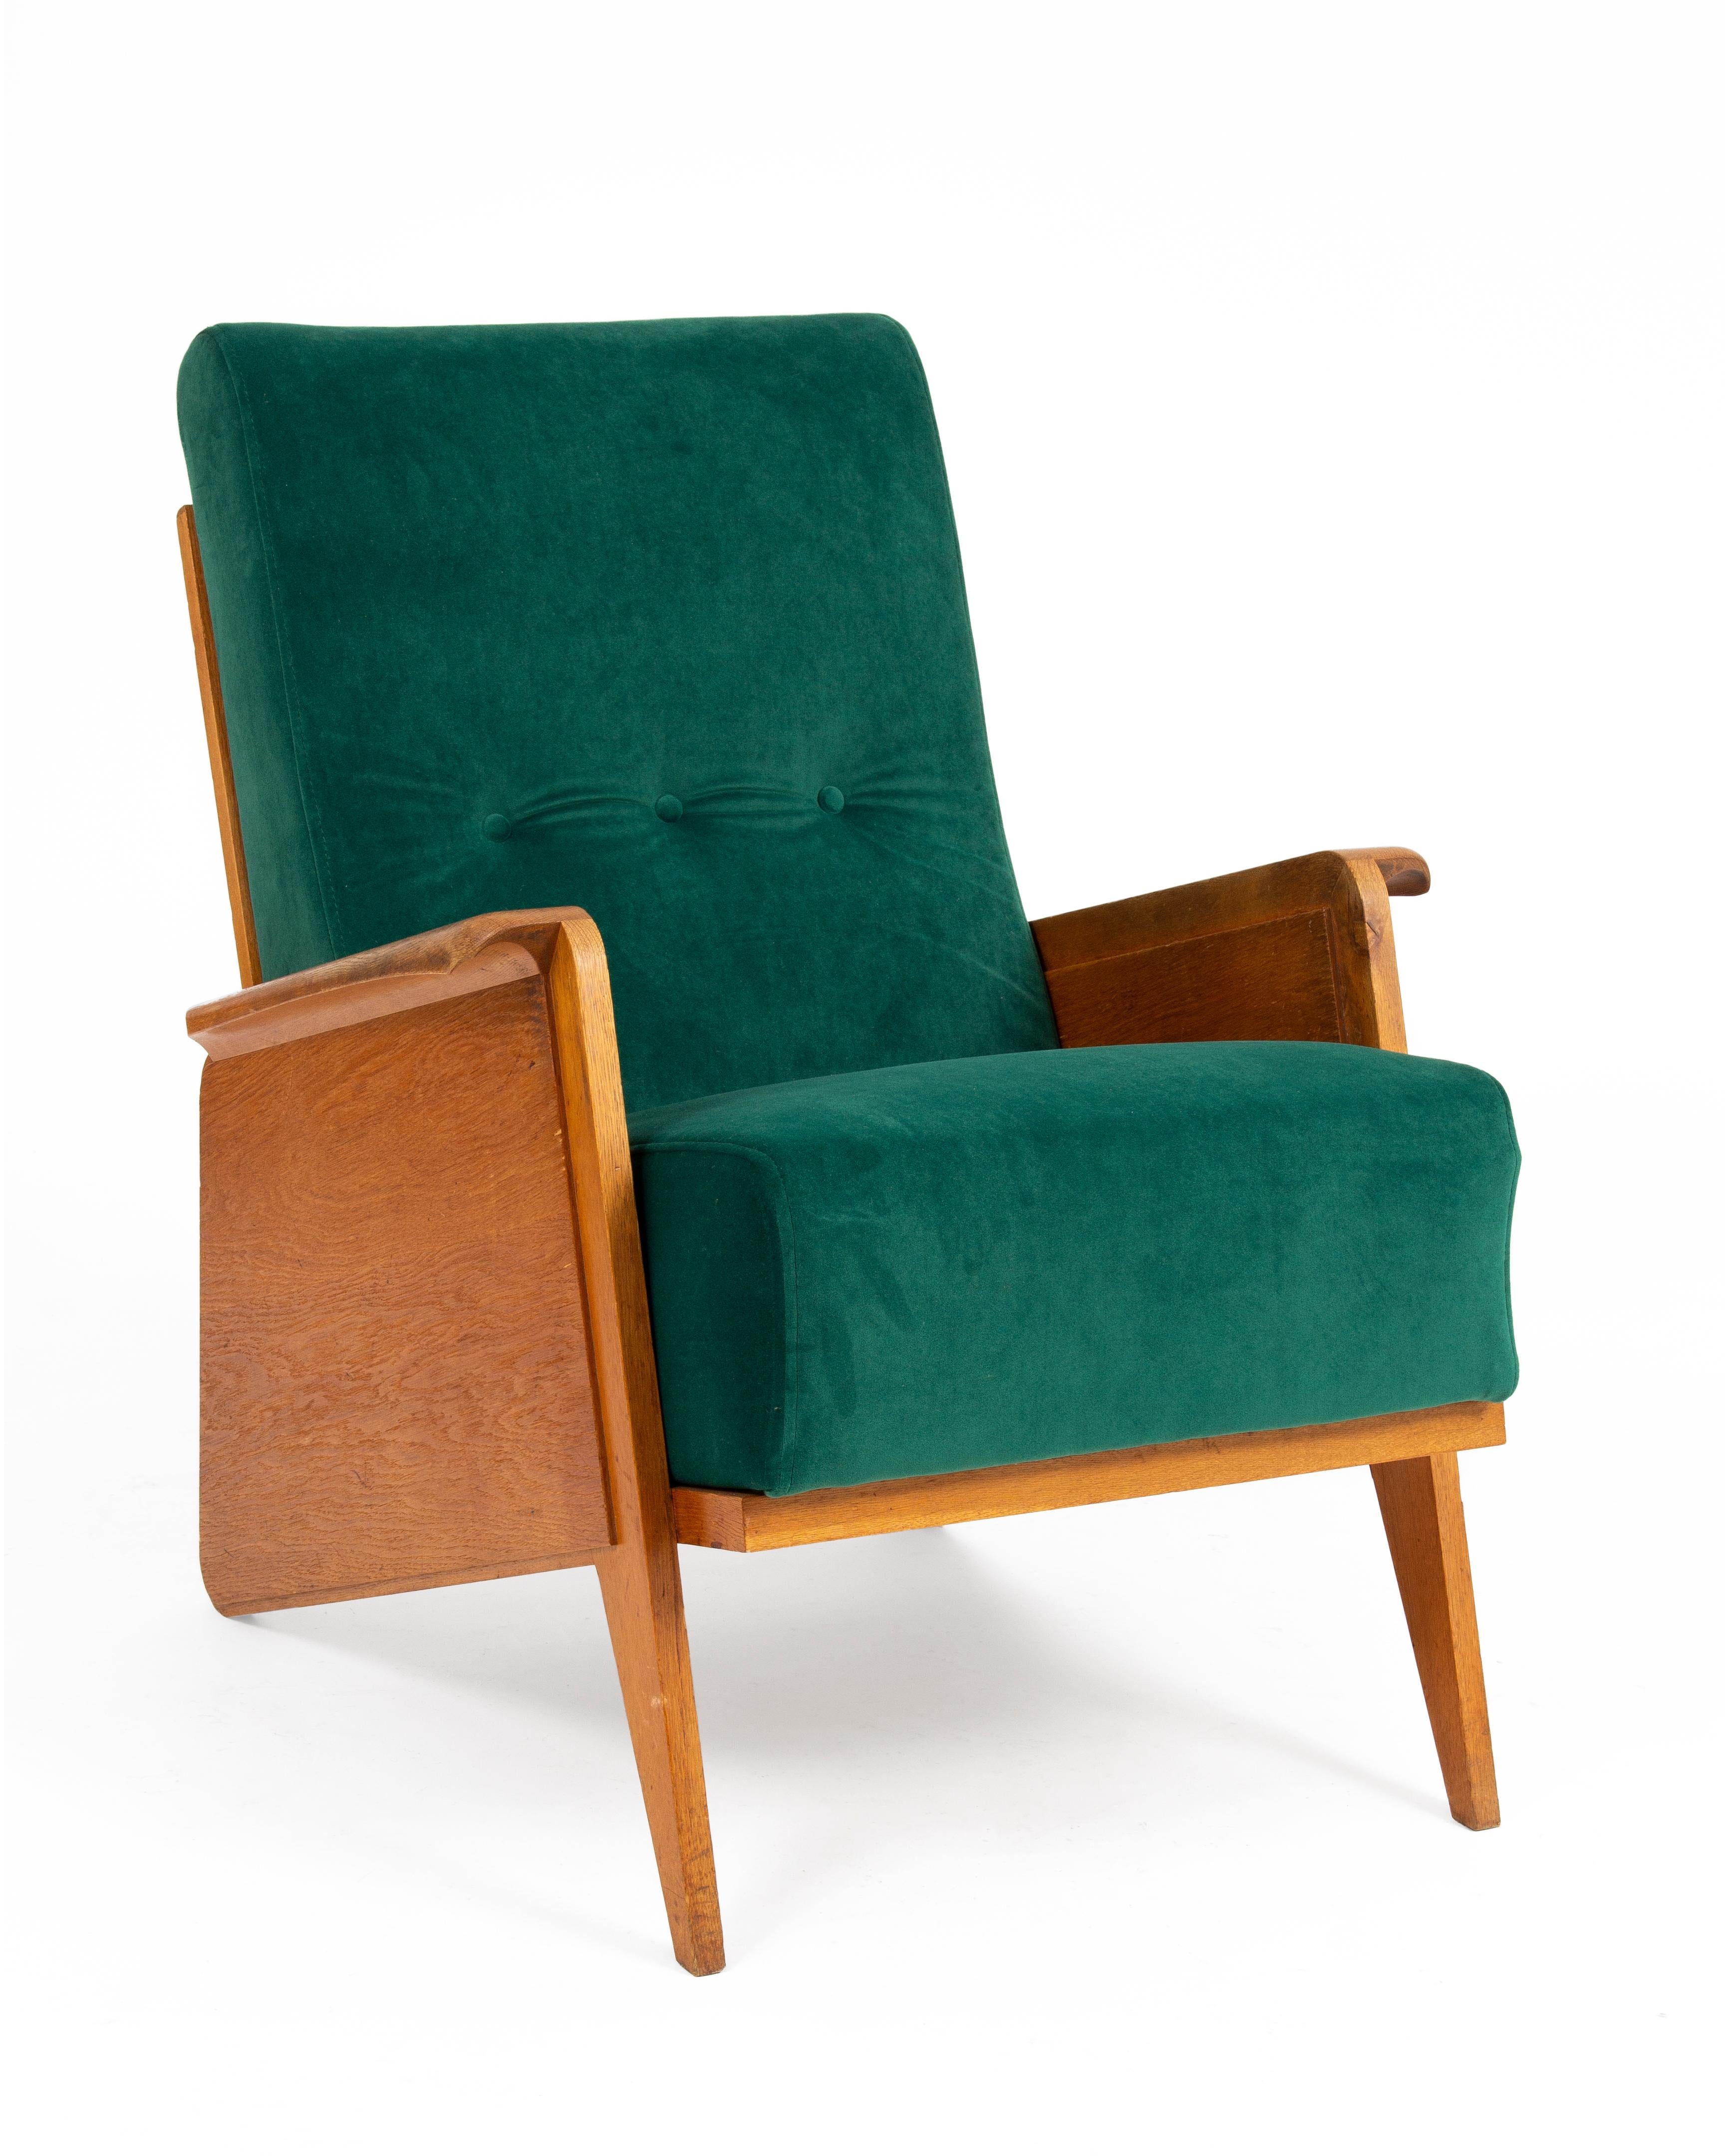 Mid-20th Century Armchairs in Pair, ca. 1930s '2 Pieces'